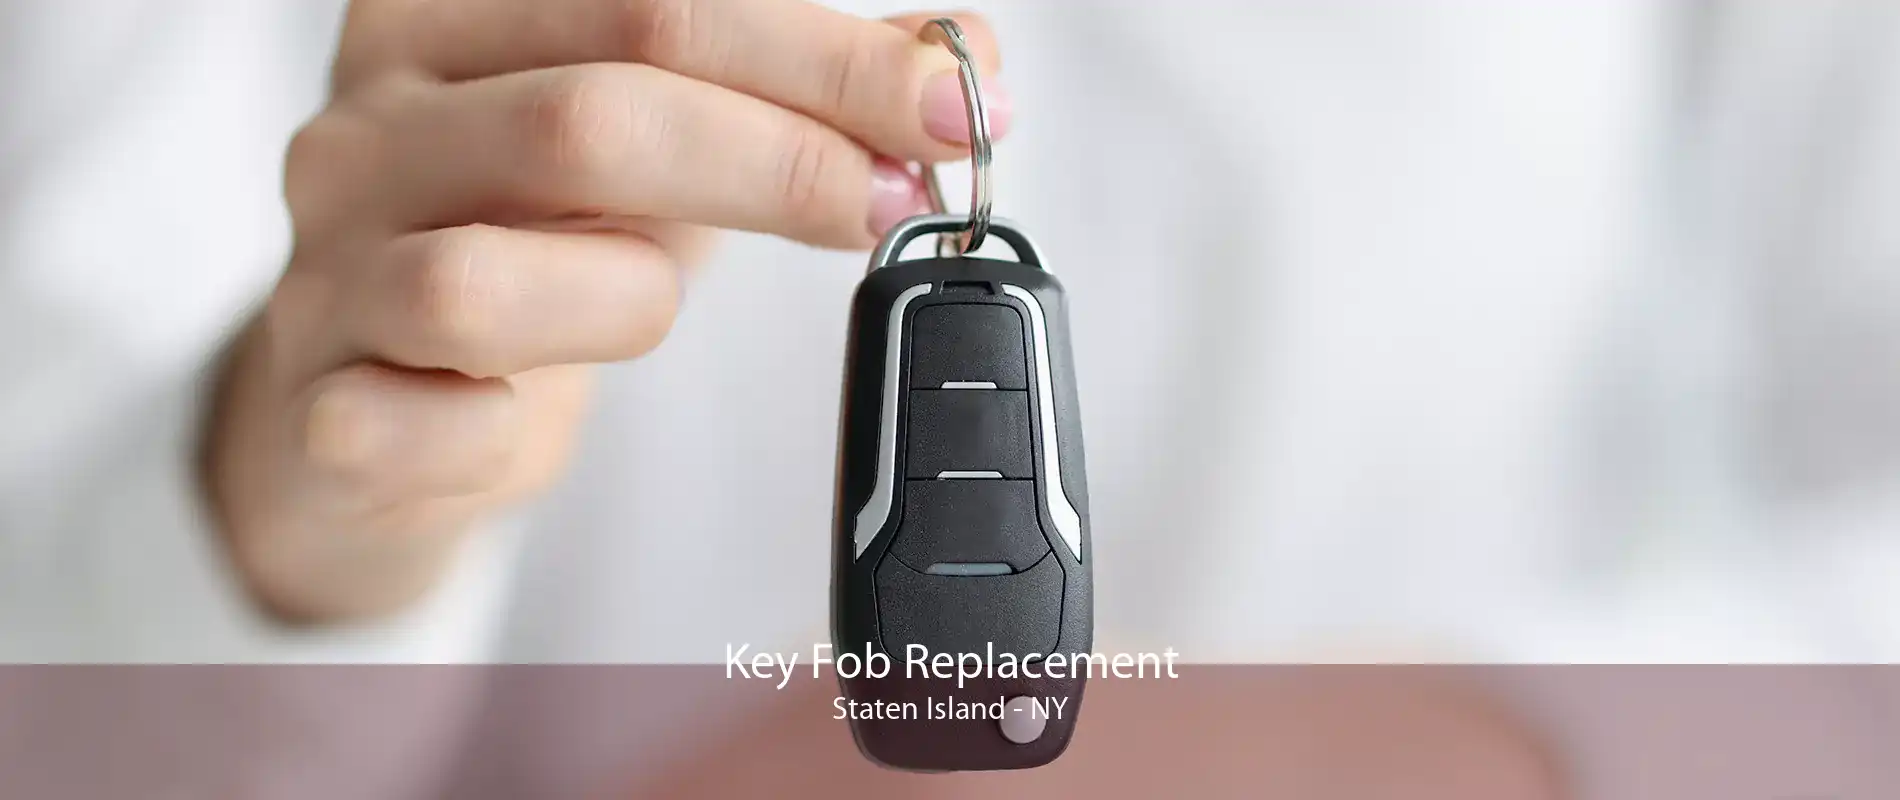 Key Fob Replacement Staten Island - NY